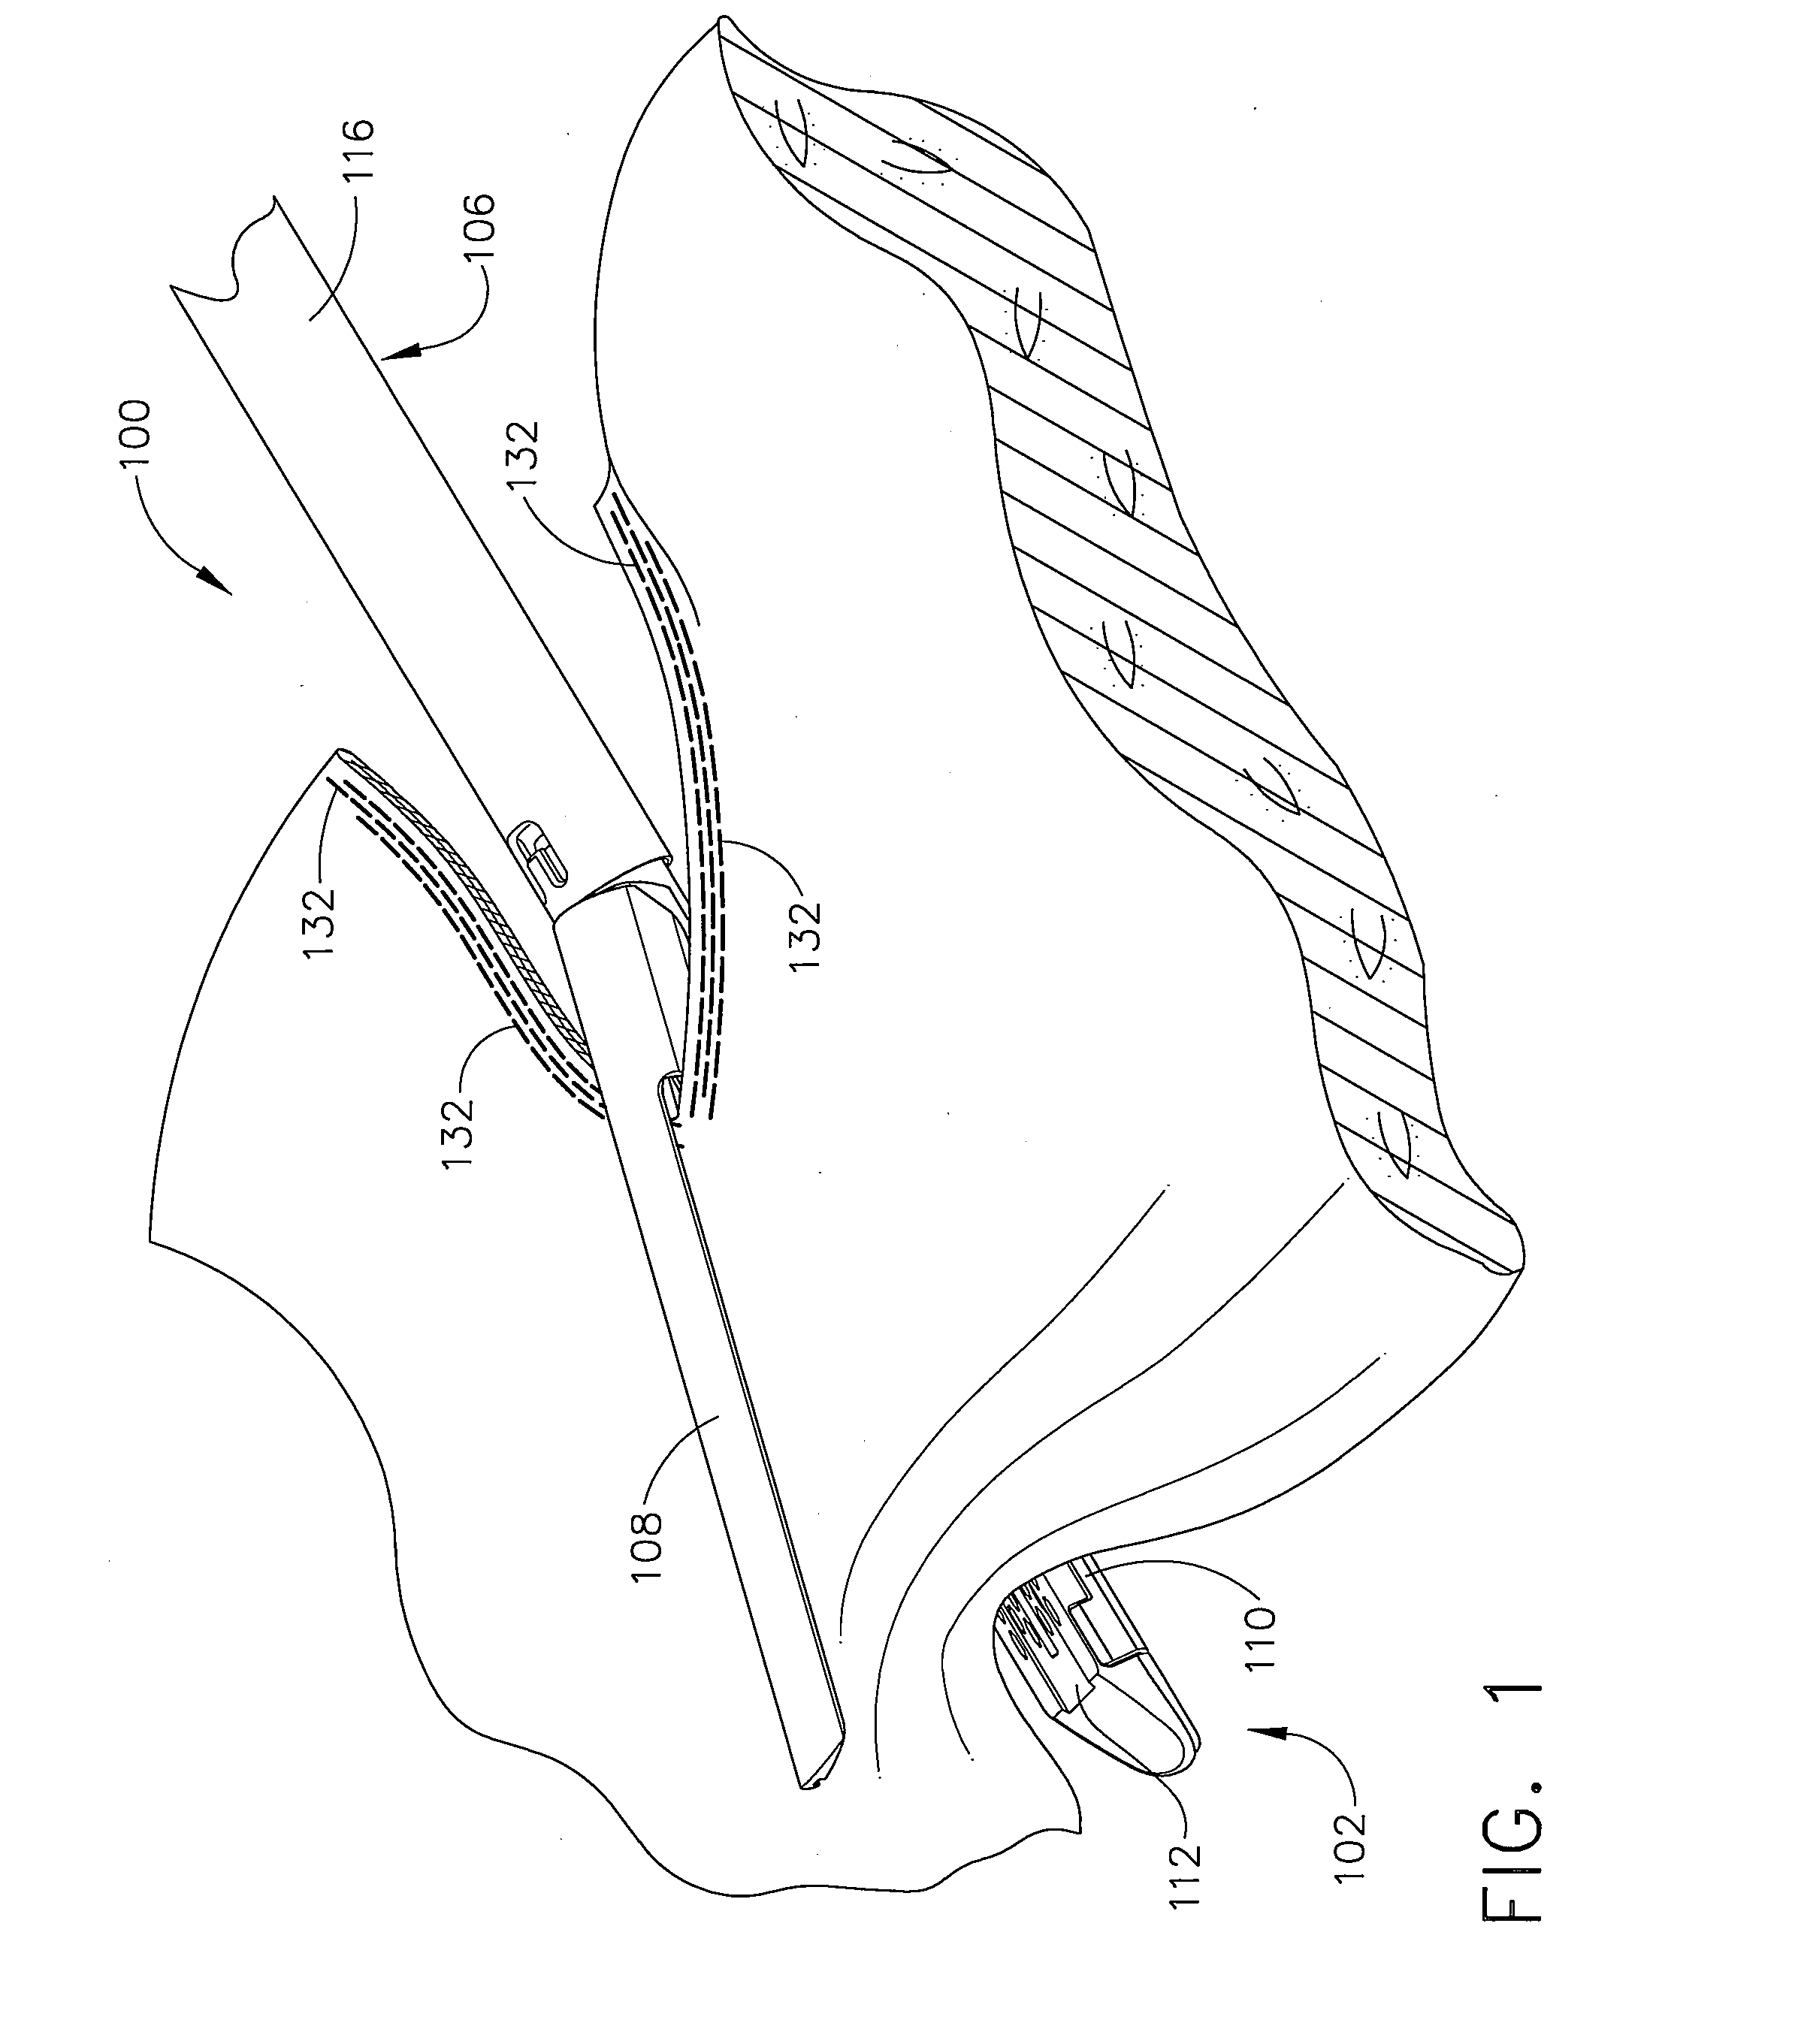 Apparatus for closing a curved anvil of a surgical stapling device